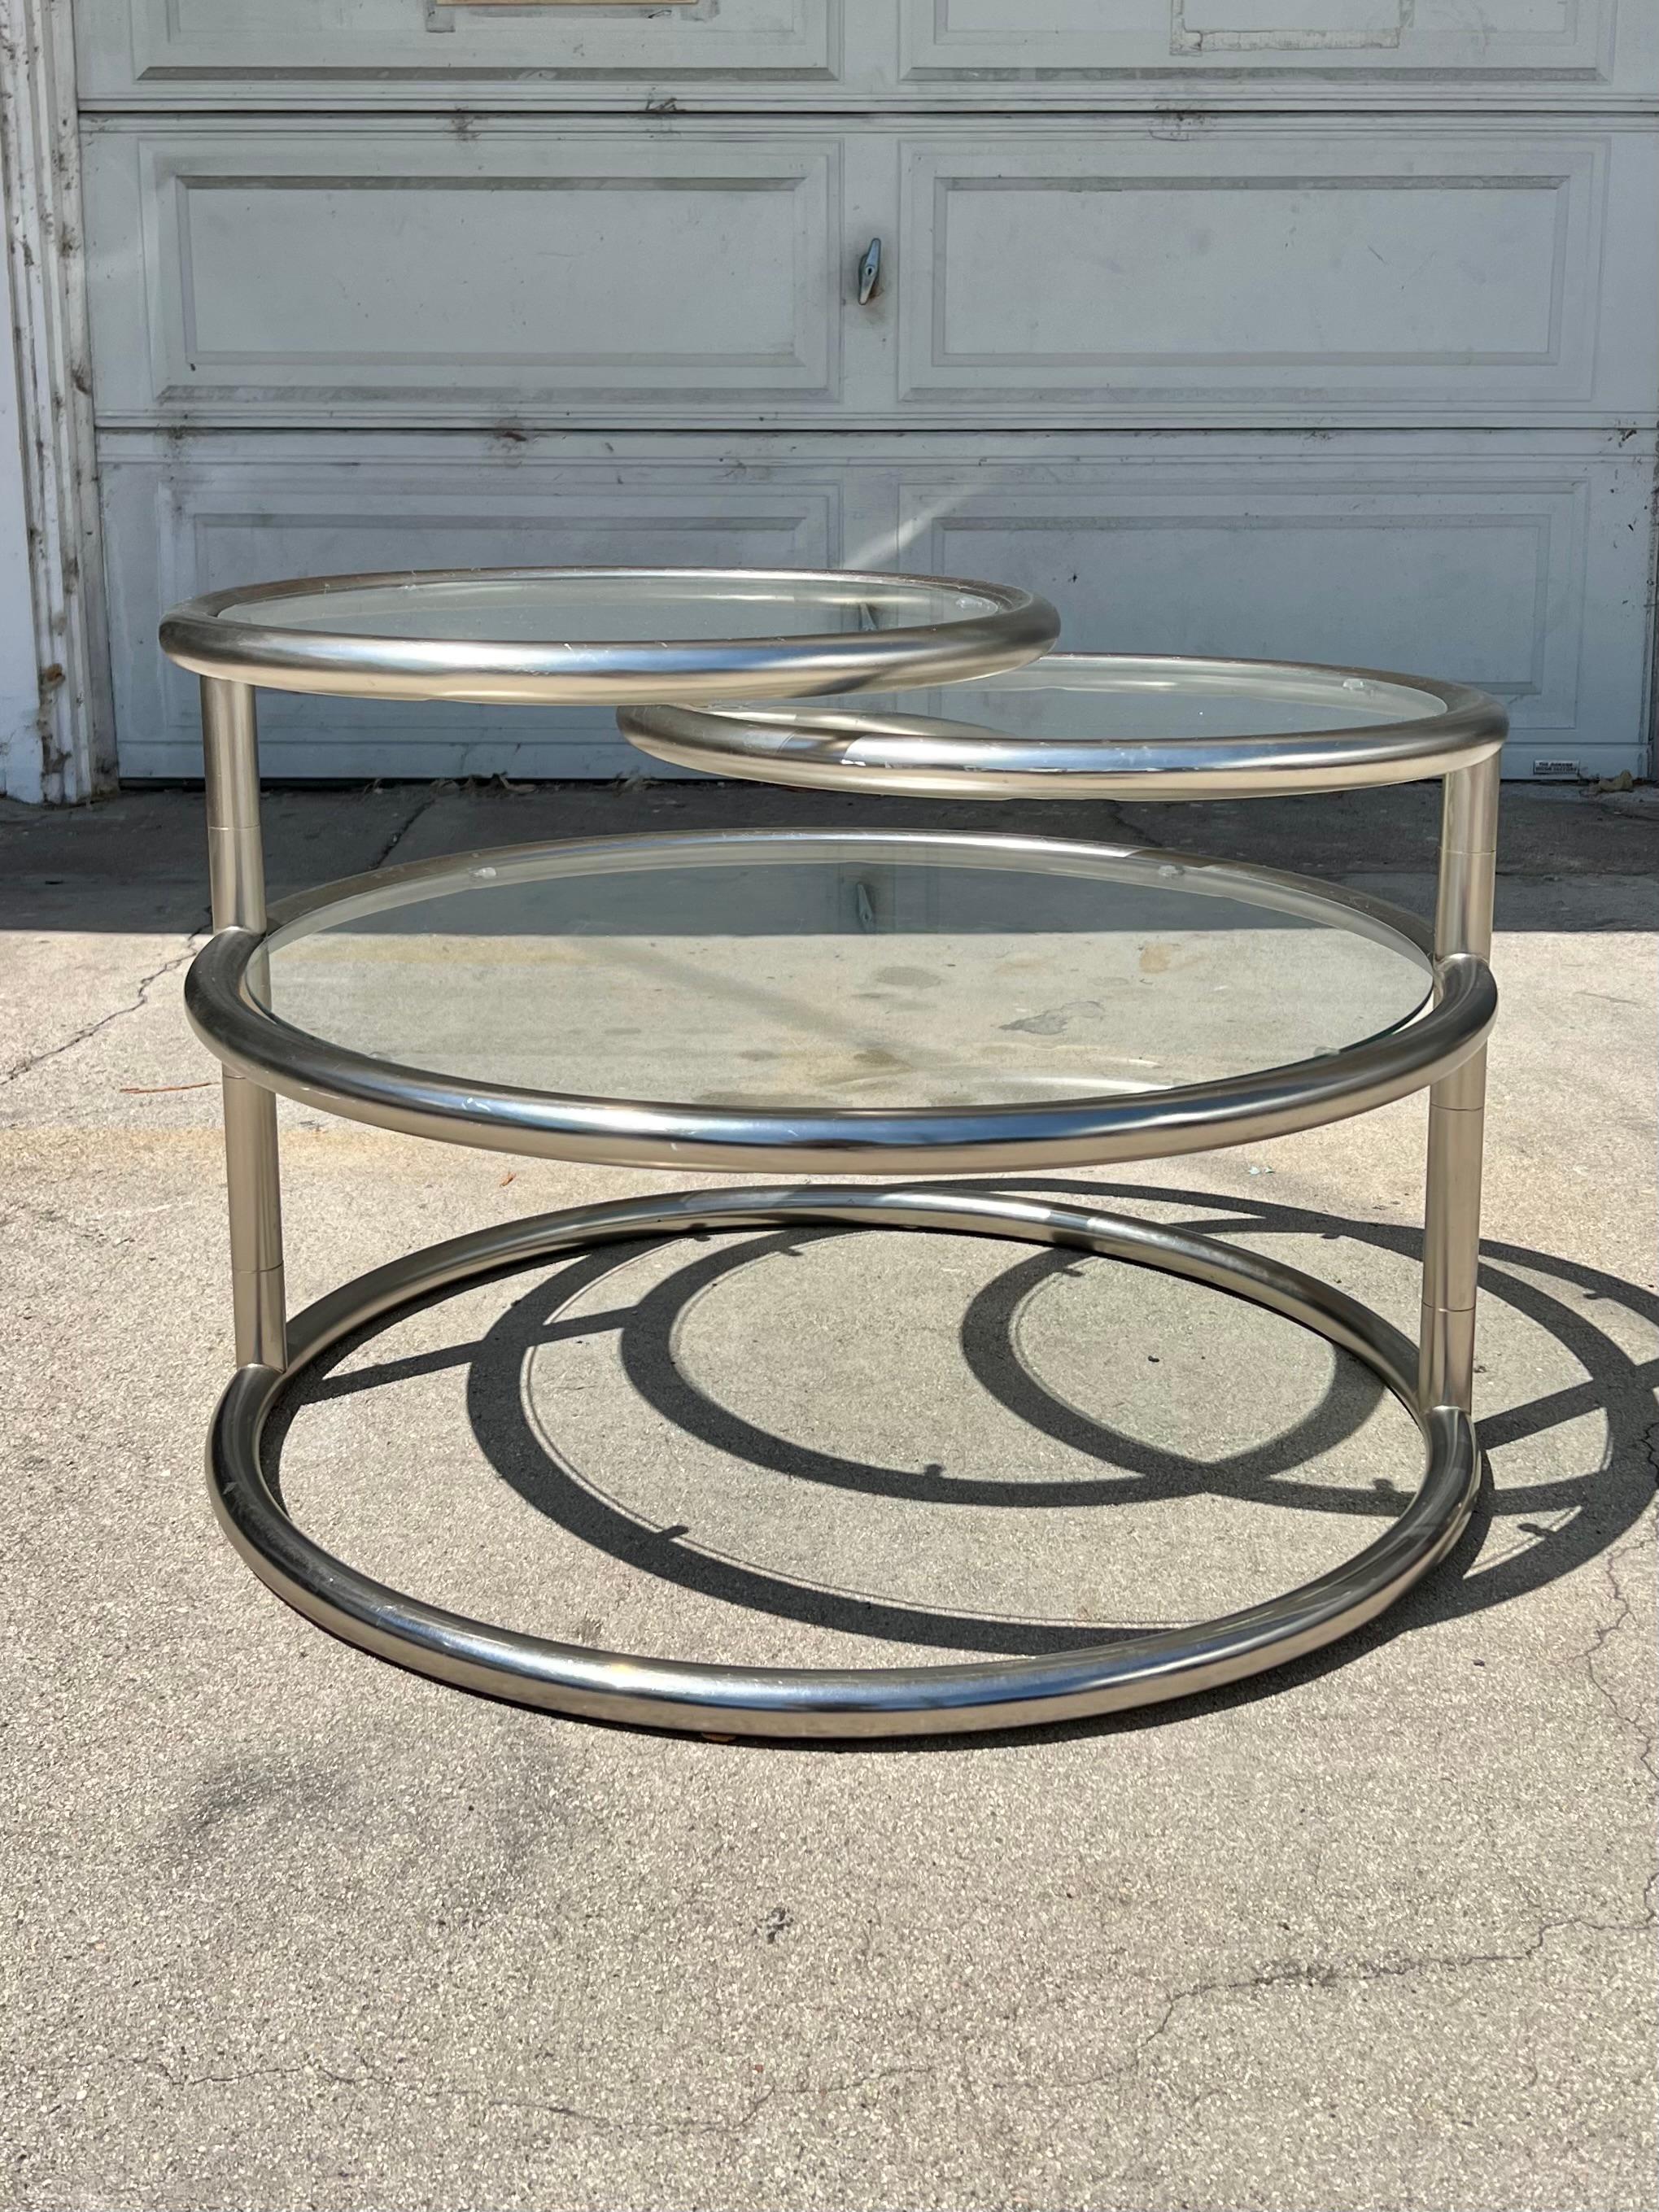 The original design of this tri level articulating coffee table is attributed to Milo Baughman, though this specific manufacturer takes the OG and adds a little more space age to it, widening the tubes and brushing the chrome.

 Overall excellent